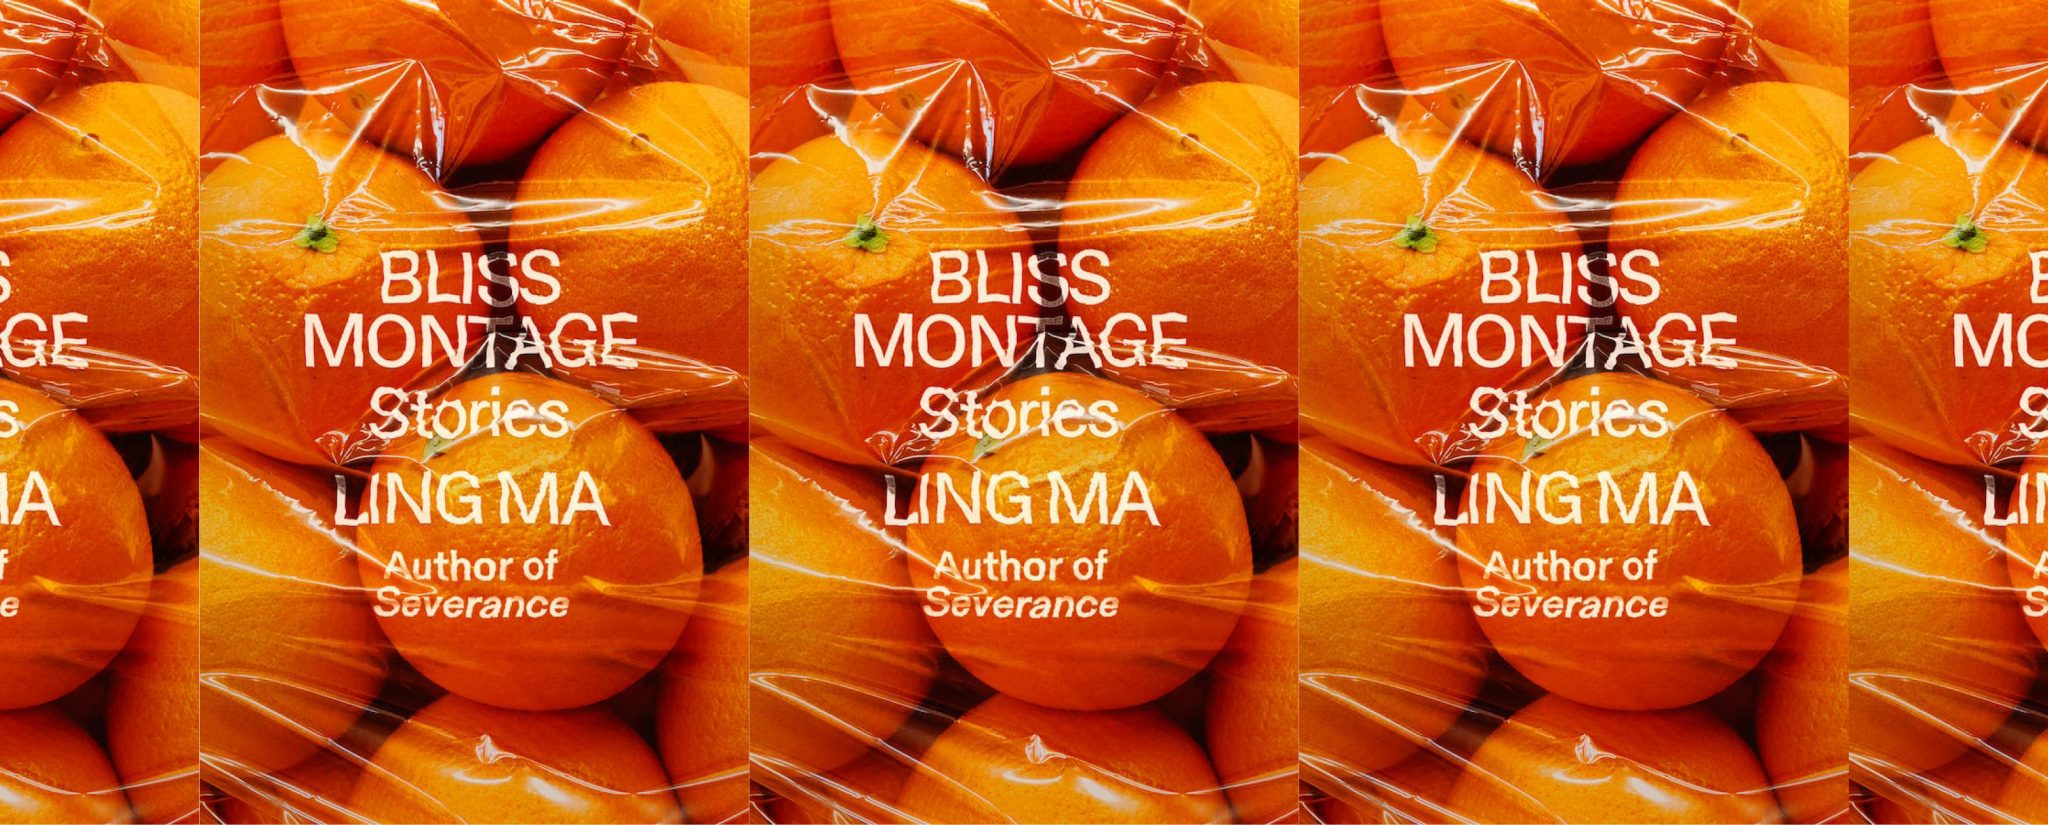 bliss montage stories by ling ma